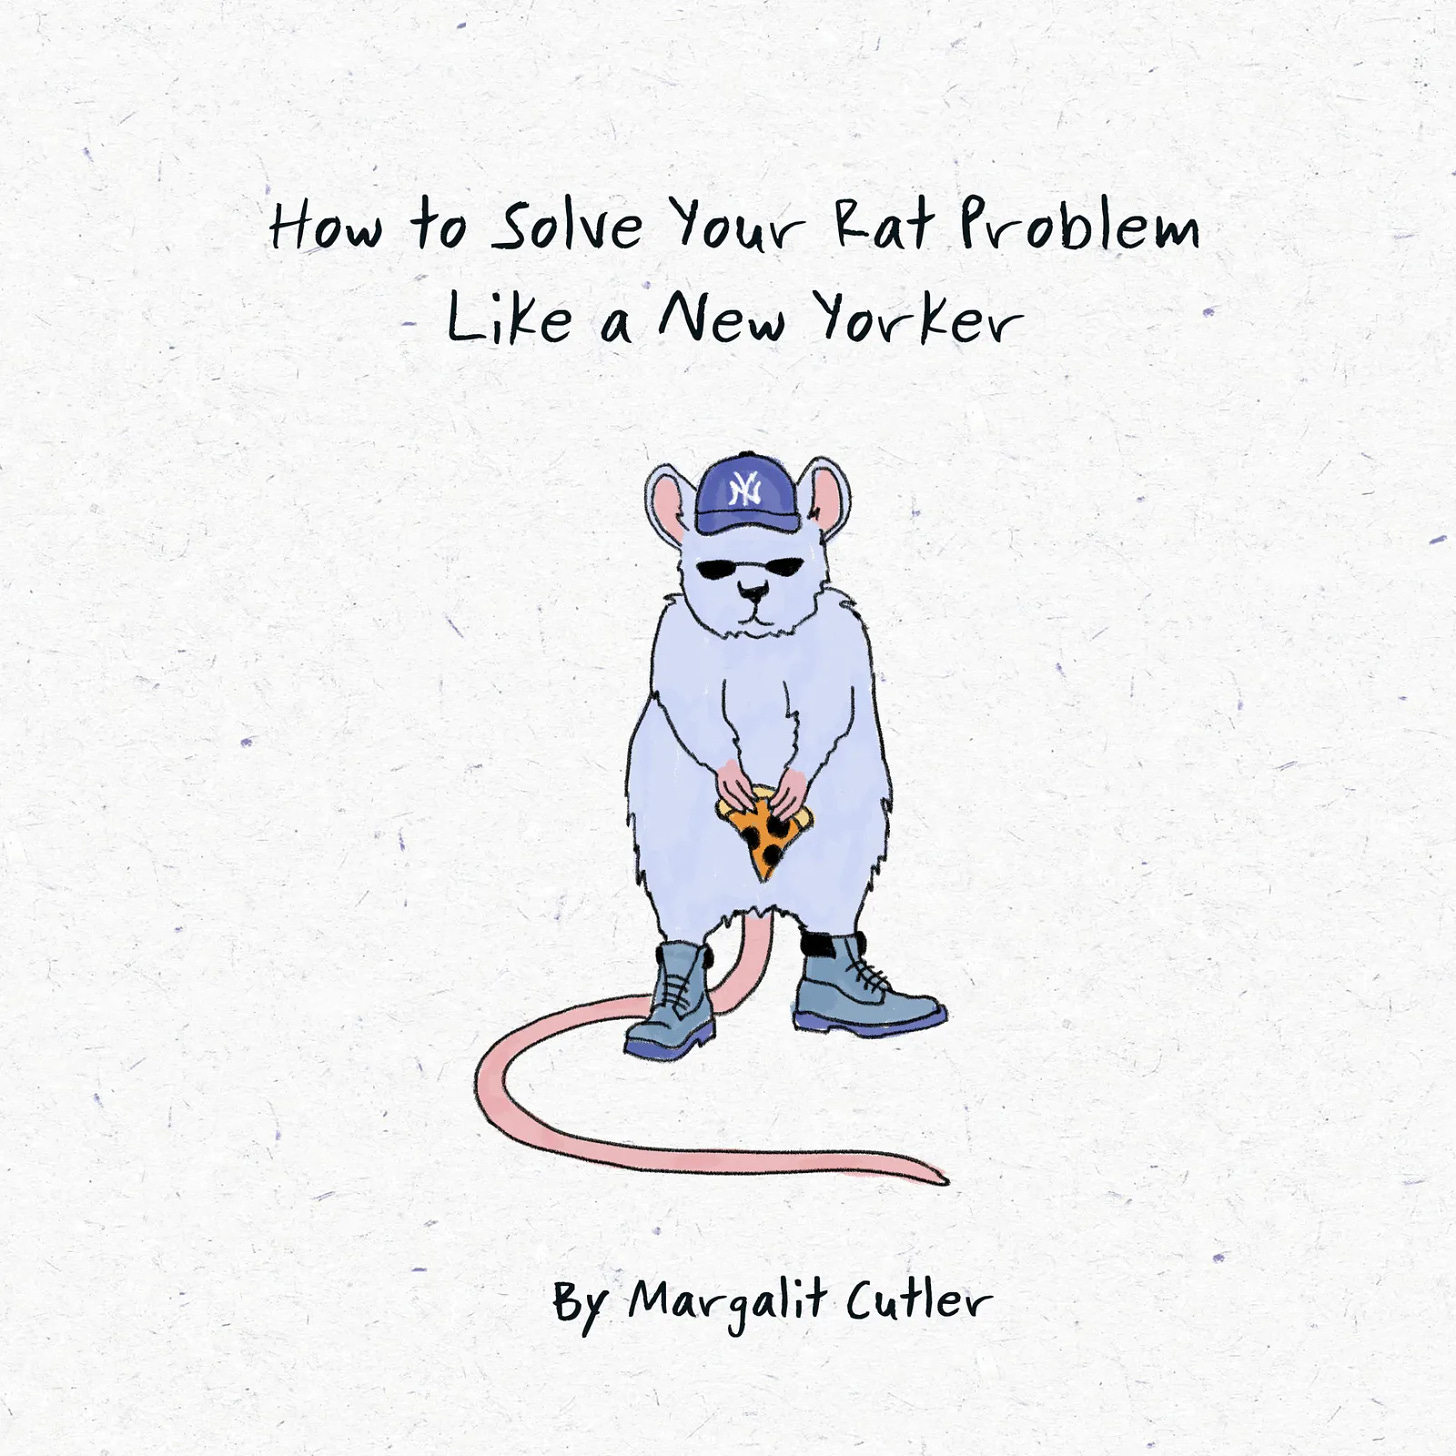 title image from the new yorker piece which features a drawing of a cute little rat in a yankees cap holding pizza and wearing boots